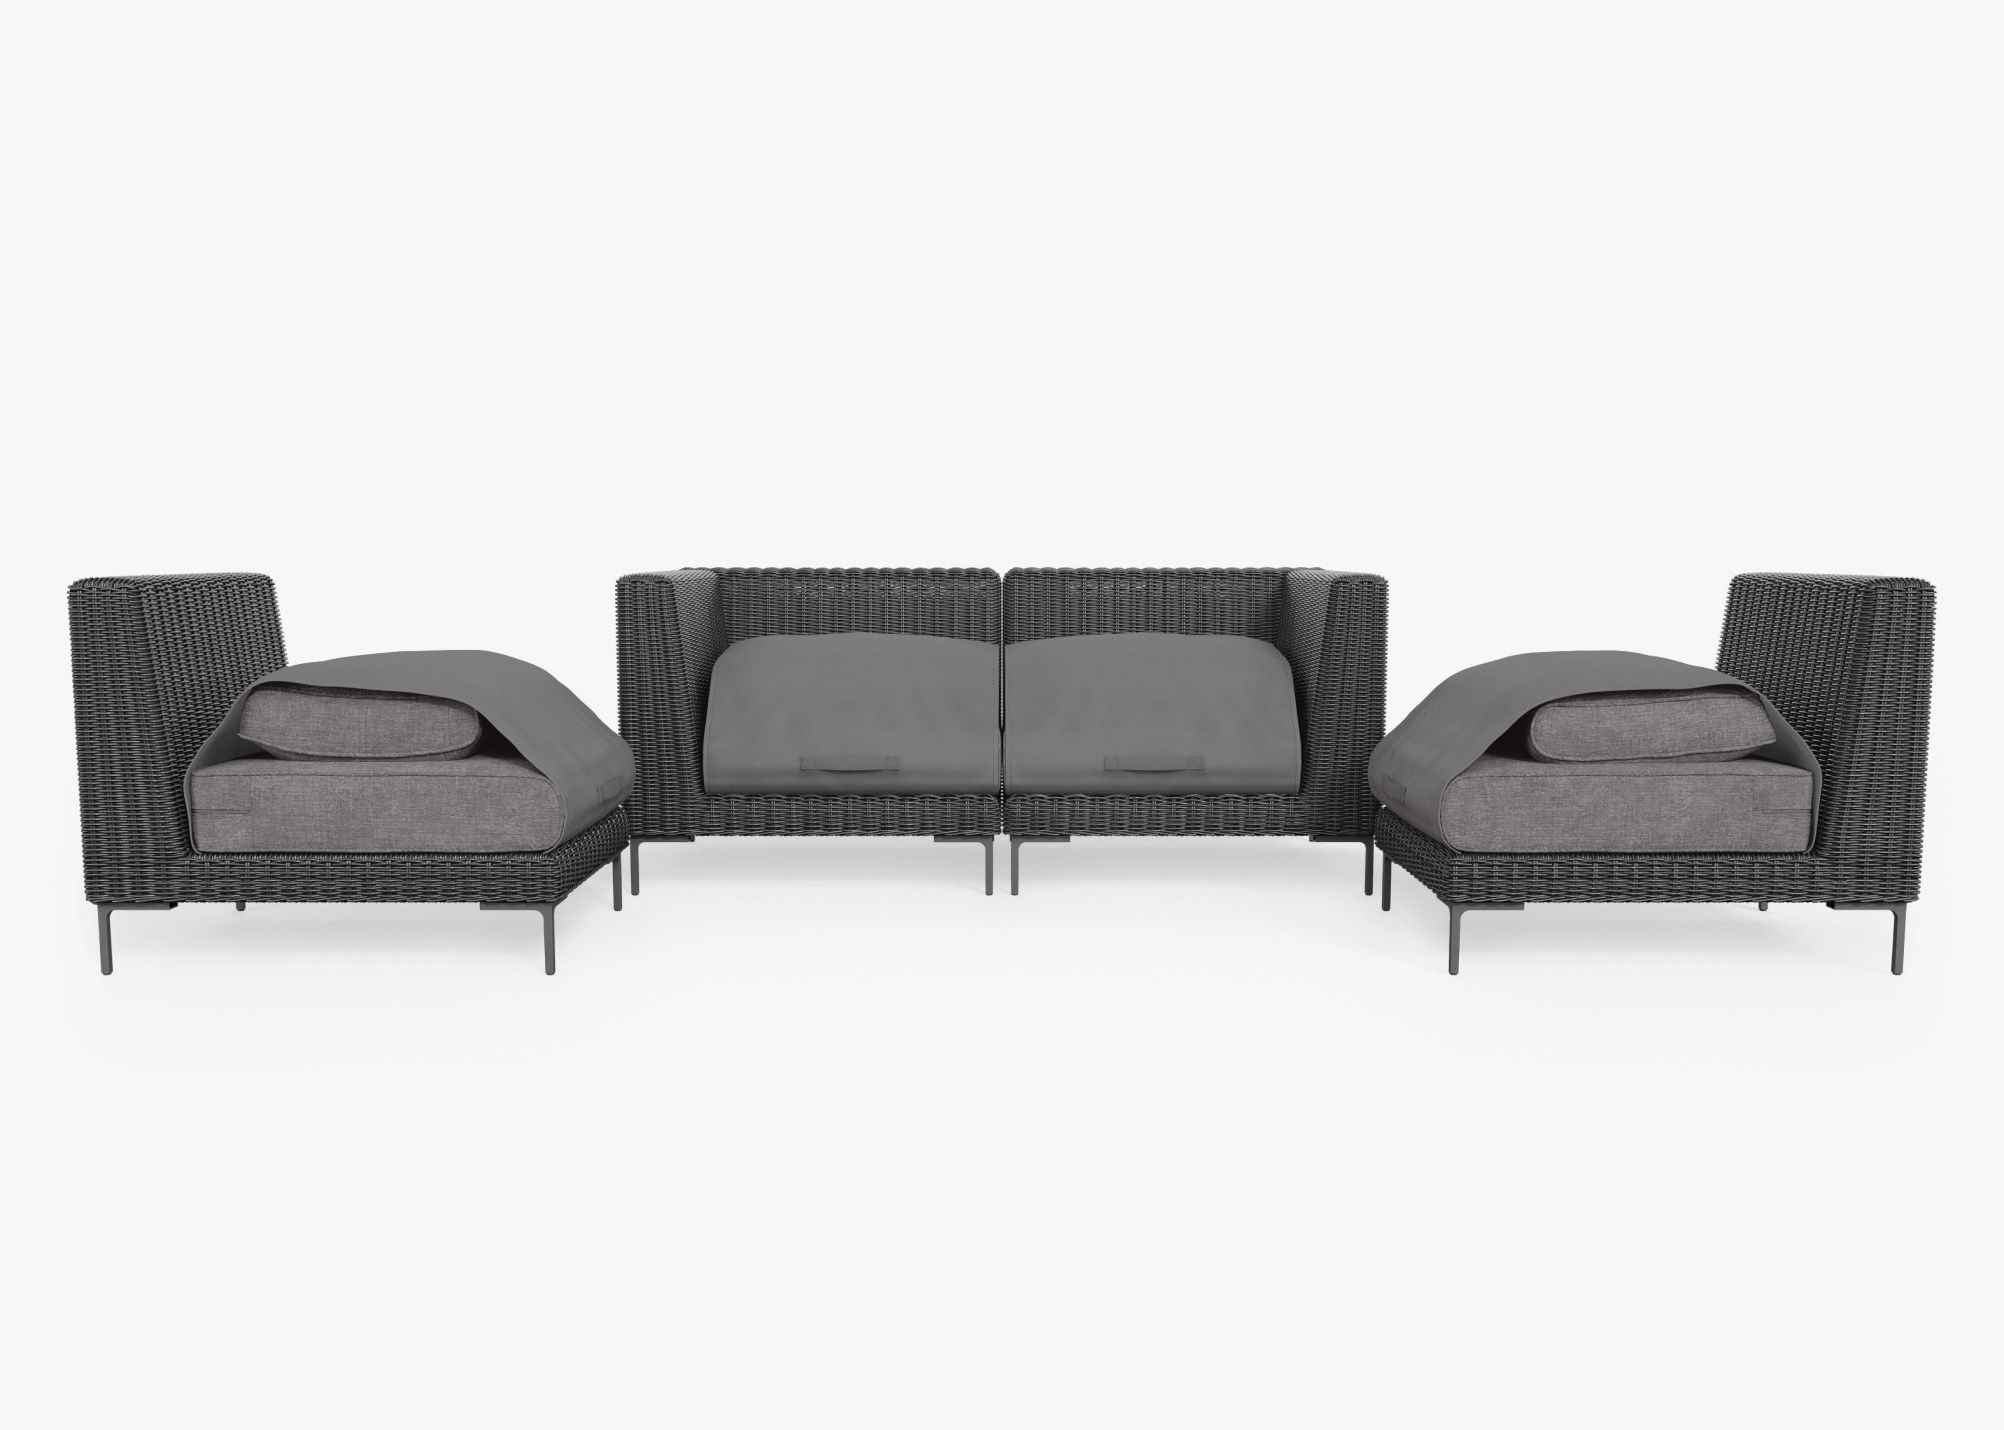 Black Wicker Outdoor Loveseat with Armless Chairs - 4 Seat shown with the OuterShell outdoor cushion cover, offering exclusive integrated protection.